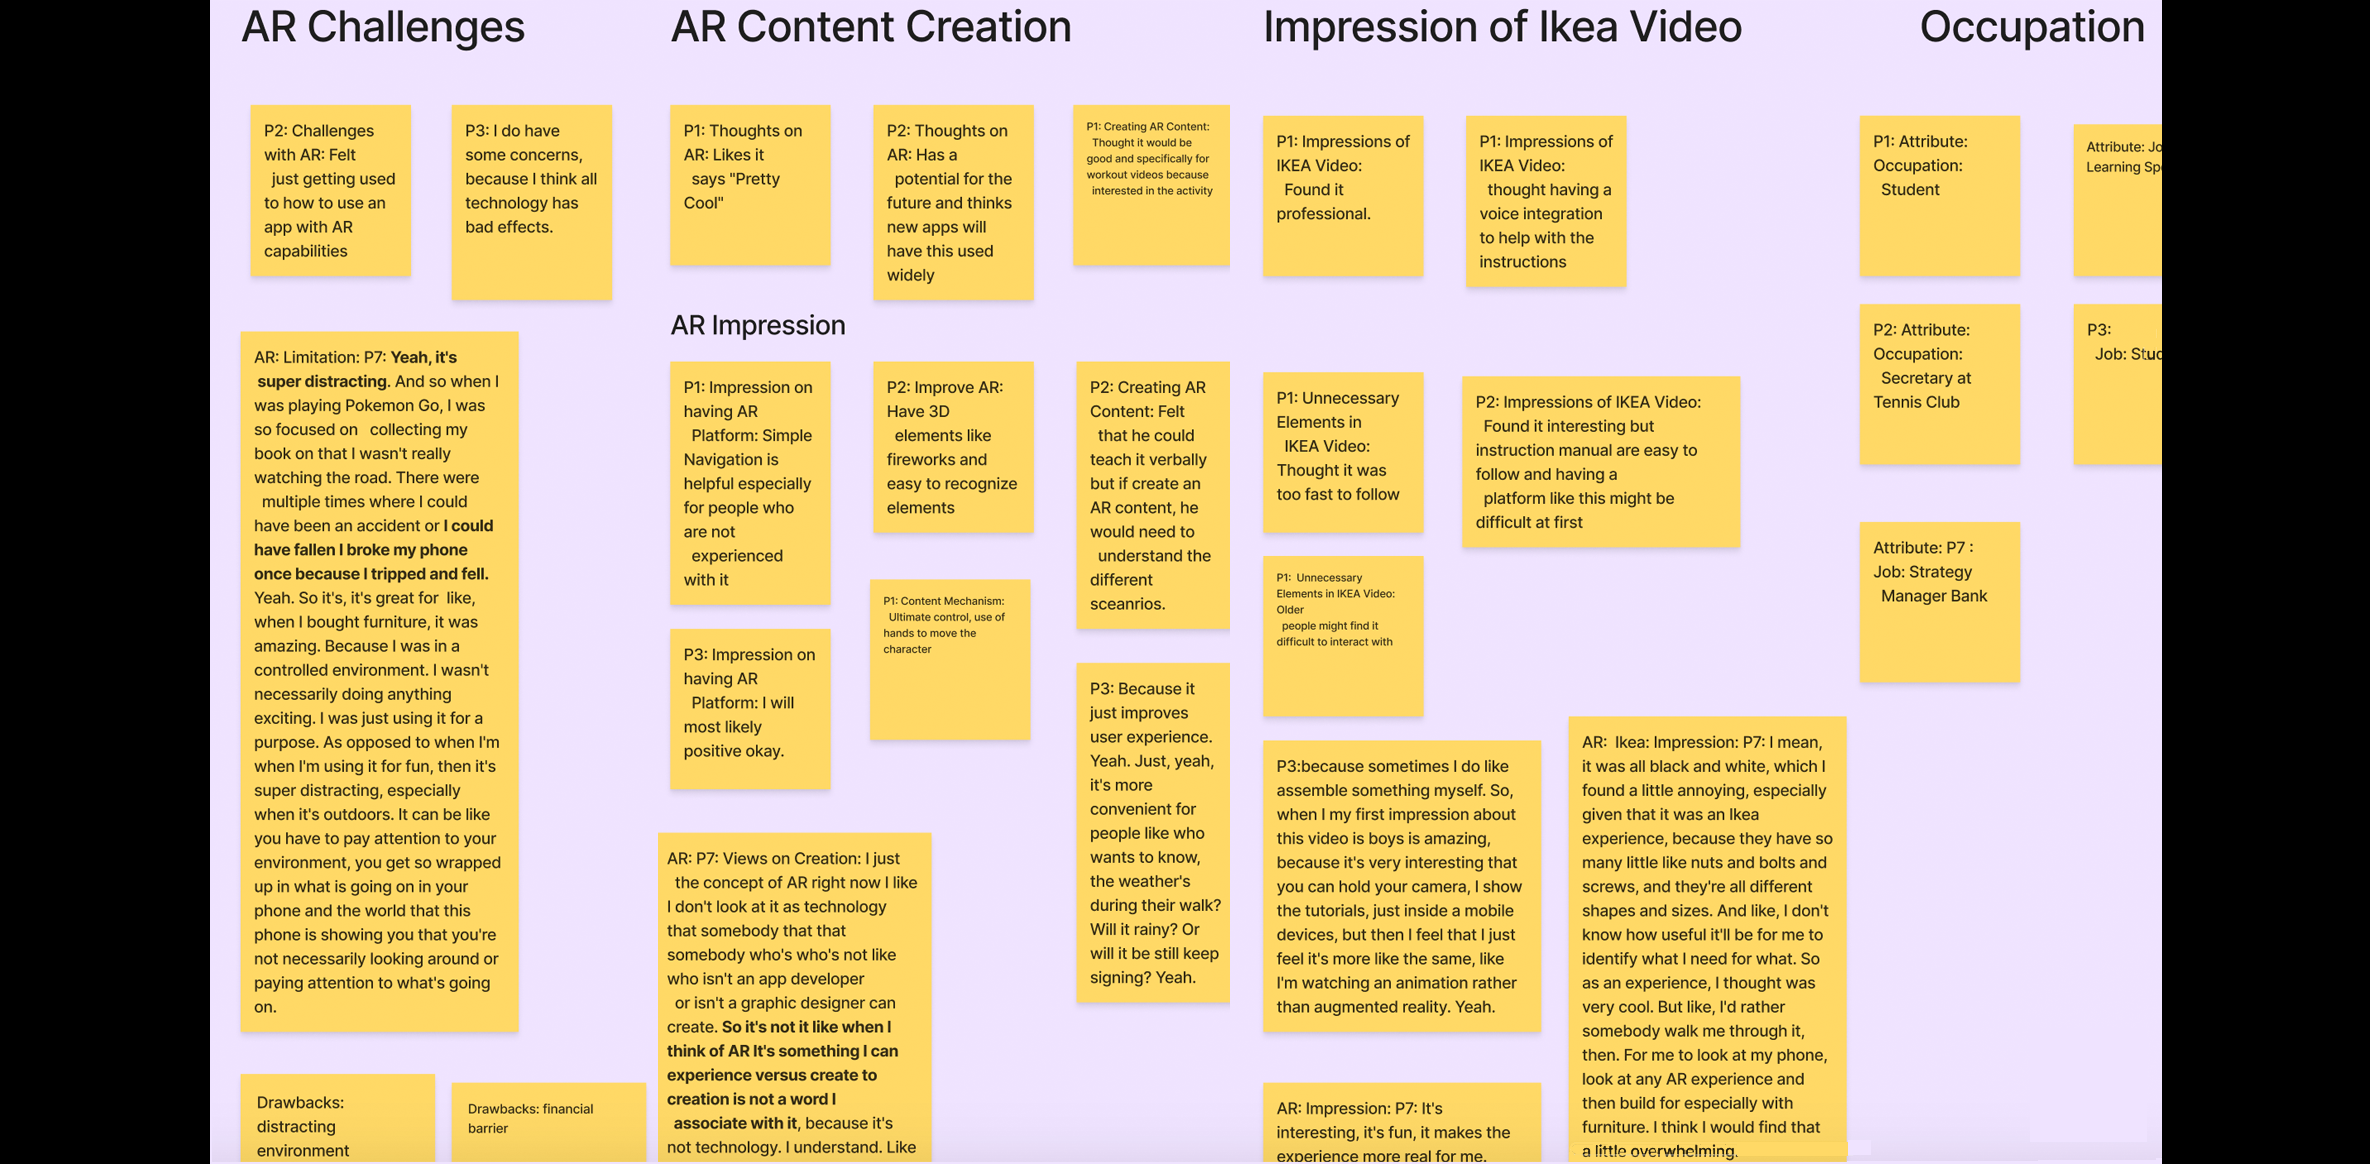 Novice Affinity Diagram for AR Content Creation, and Impression of IKEA AR Video categories.